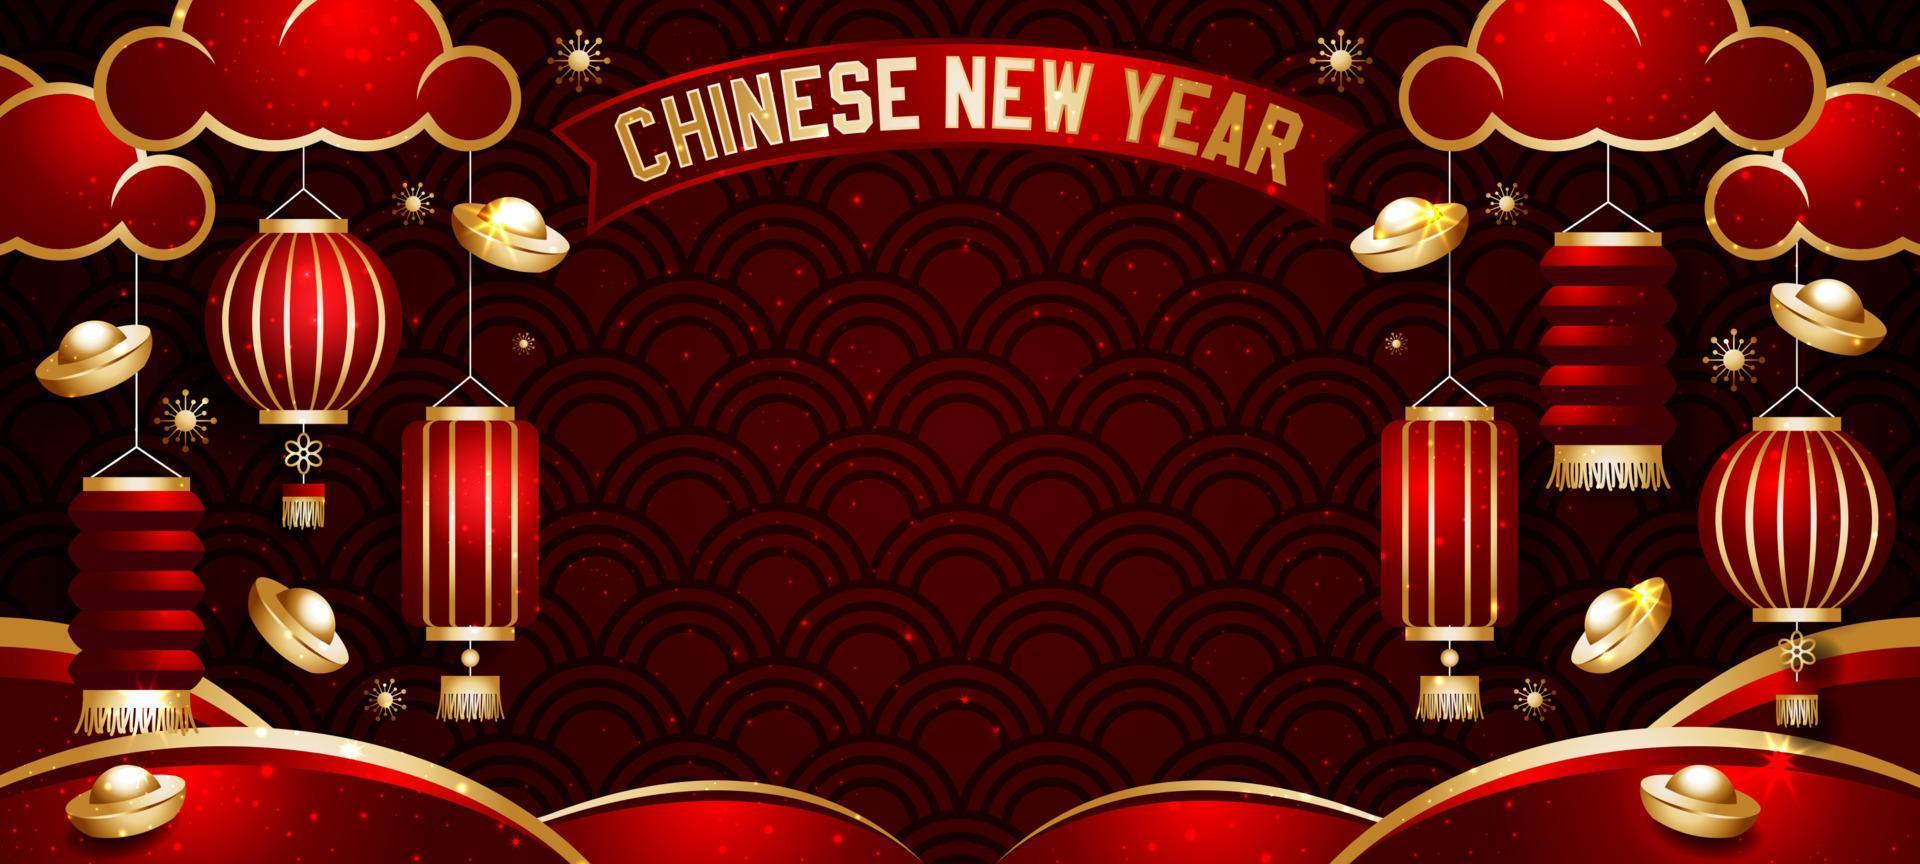 2023 Water Rabbit Chinese New Year Background vector